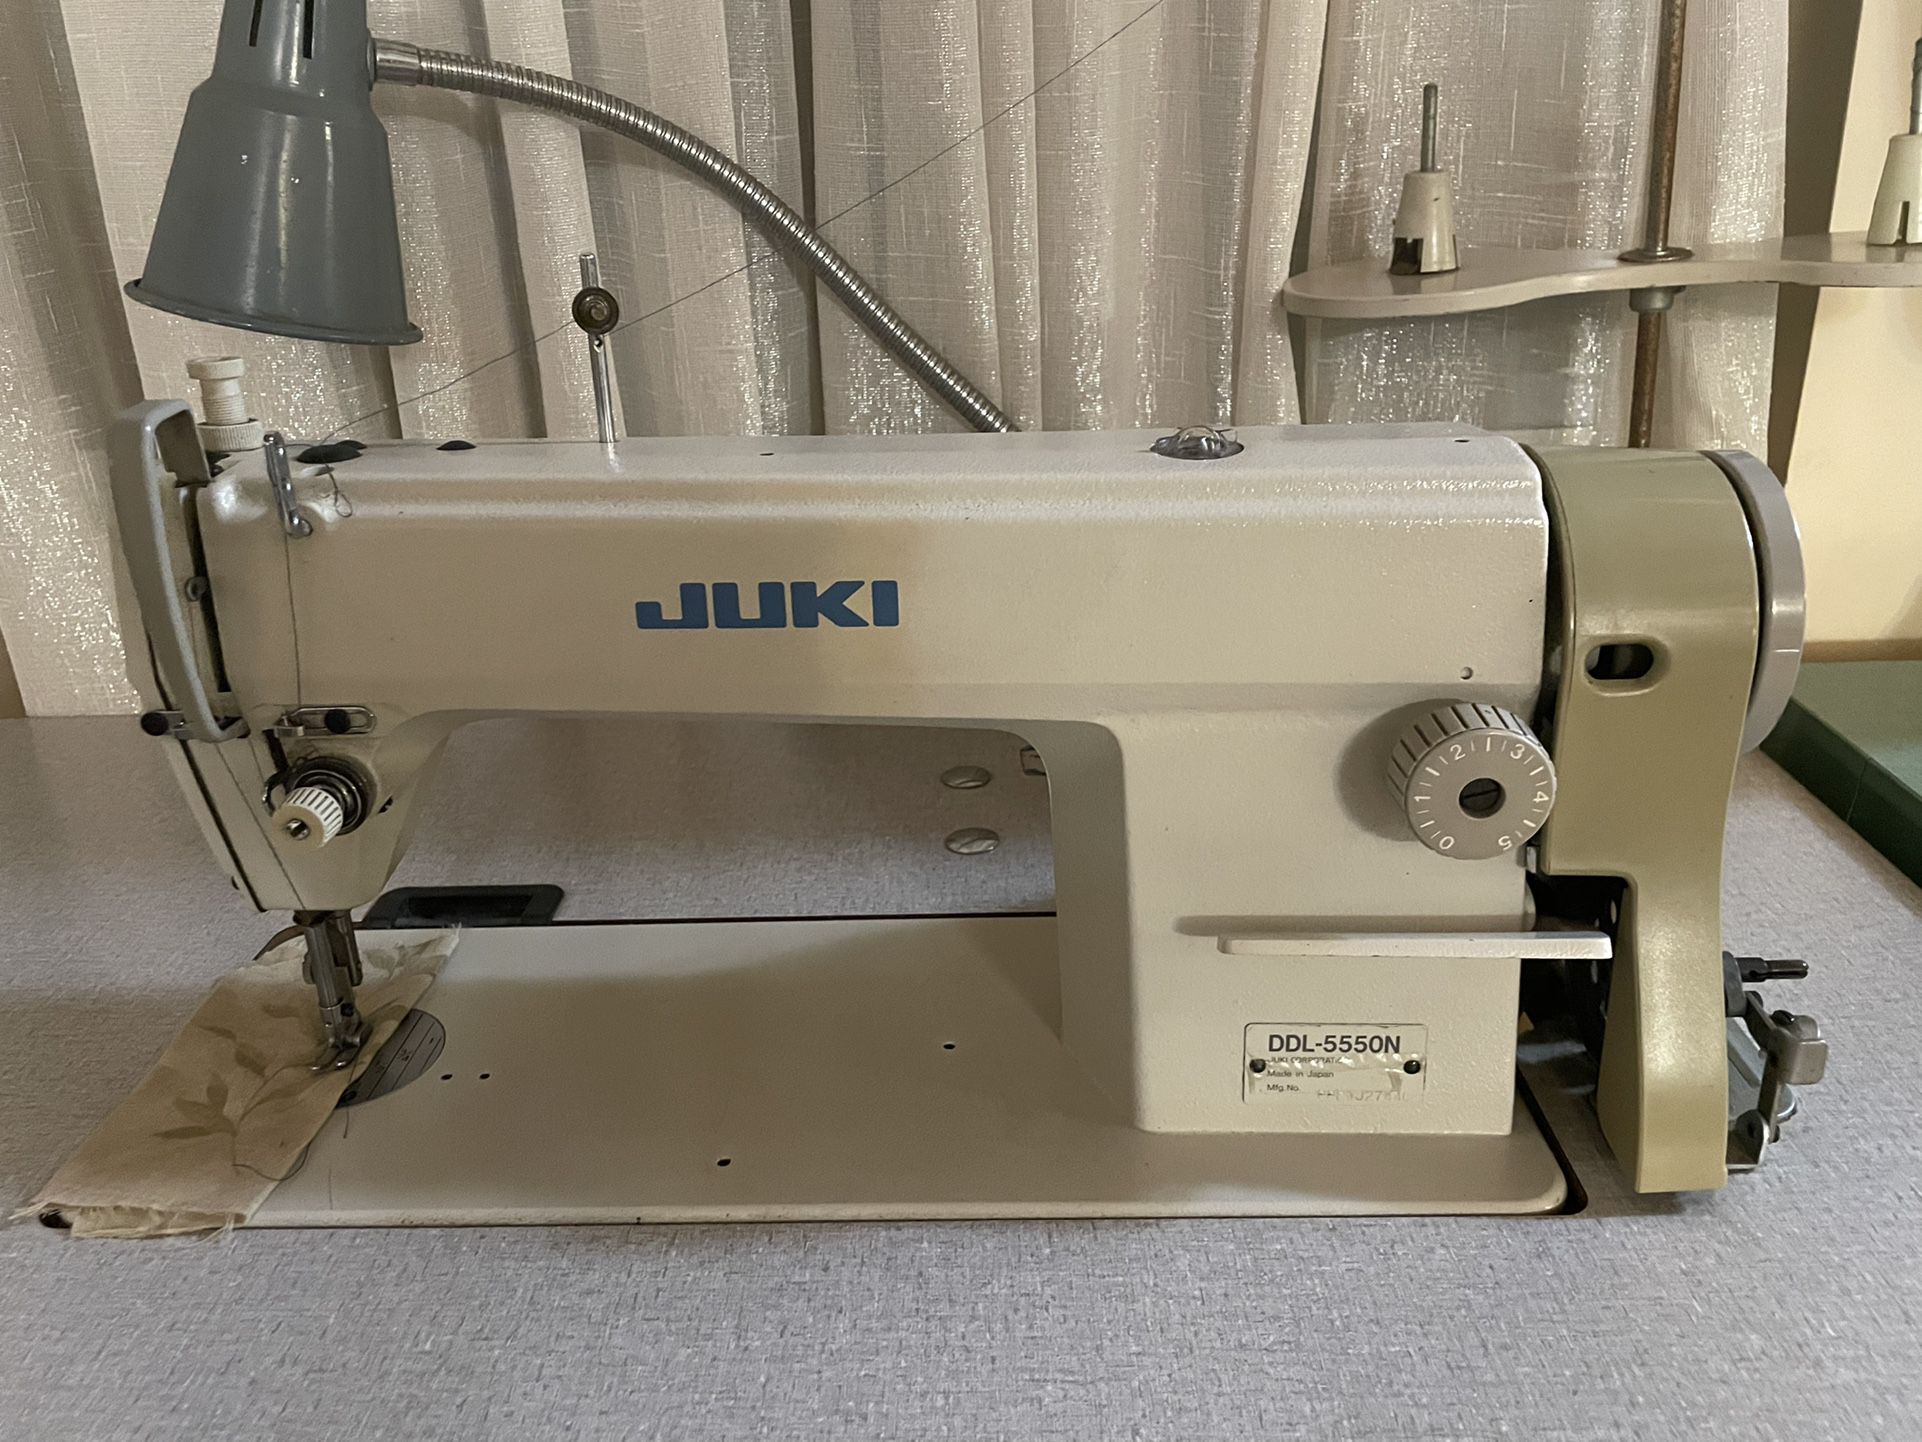 JUKI DDL-5550N High-Speed Single Needle Lockstitch Industrial Sewing Machine With Table and Servo Motor